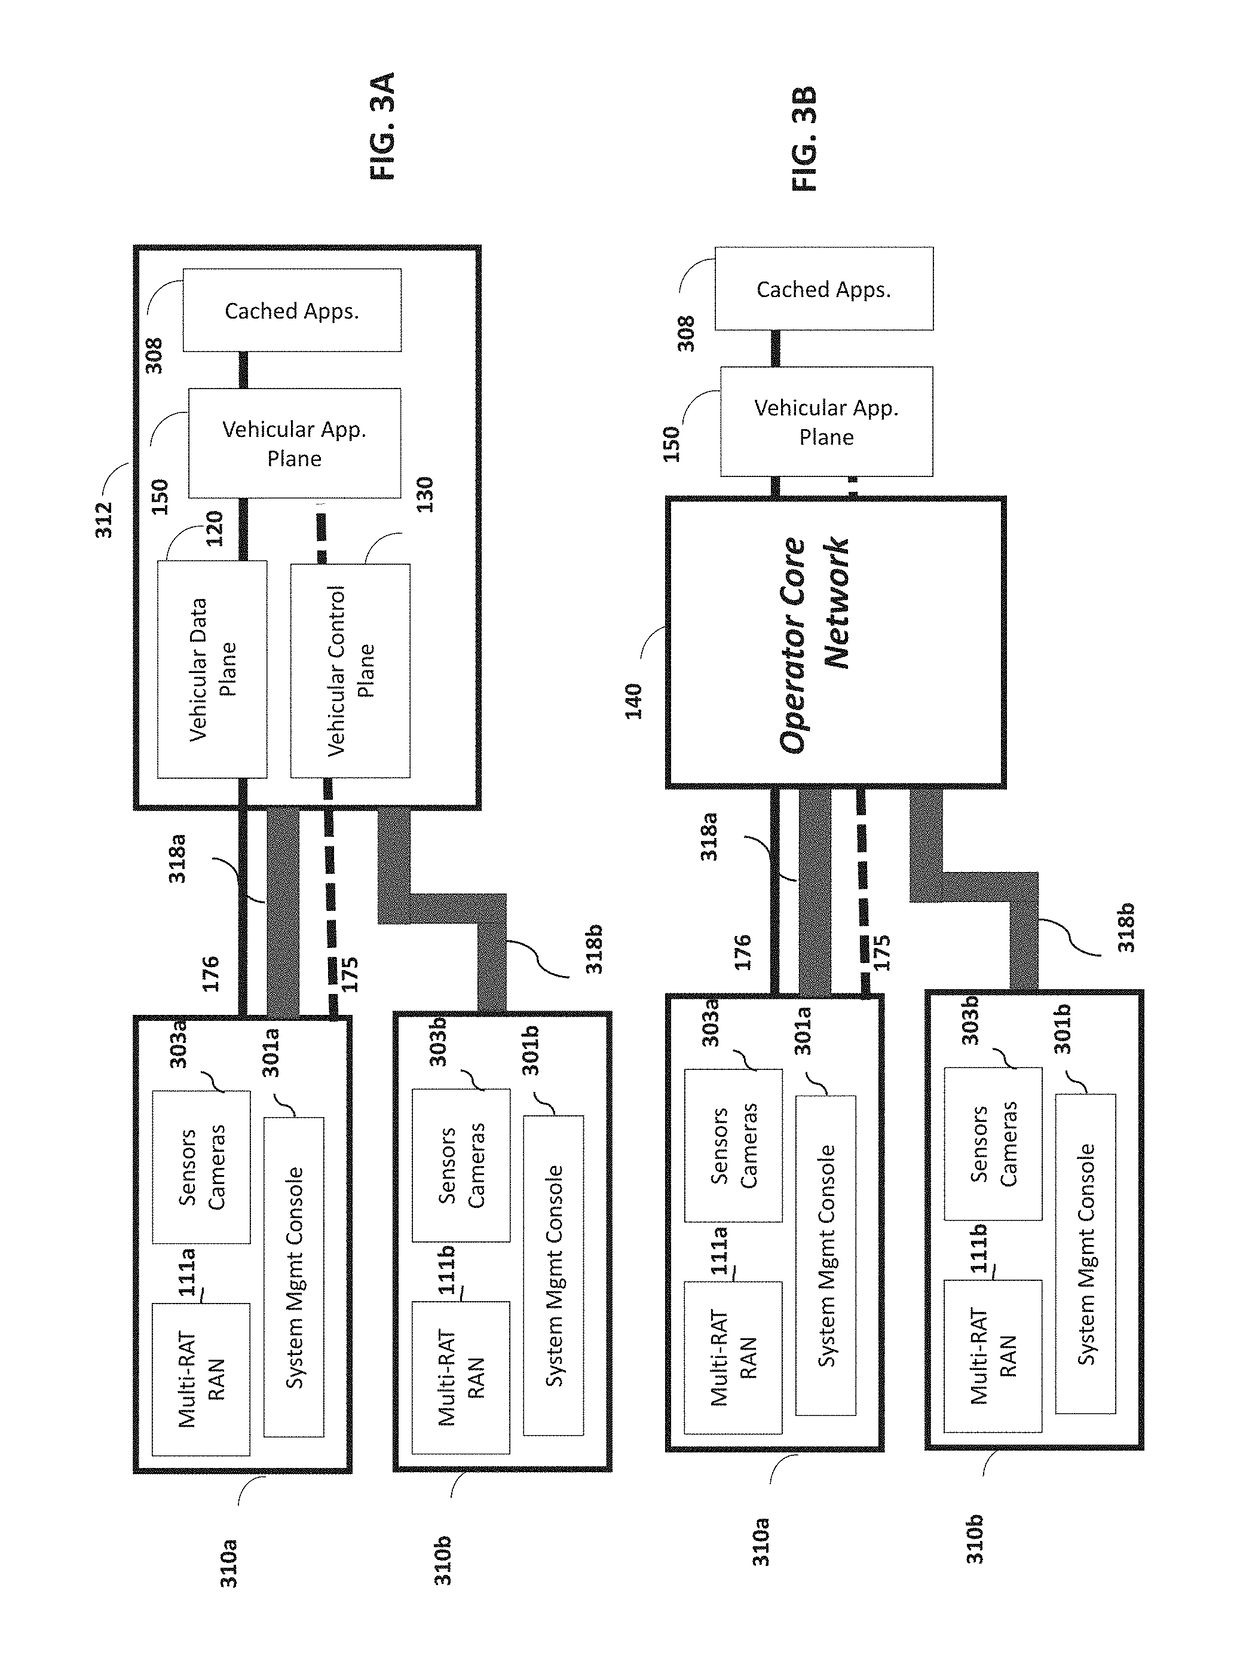 System and method for a vehicular network service over a 5G network